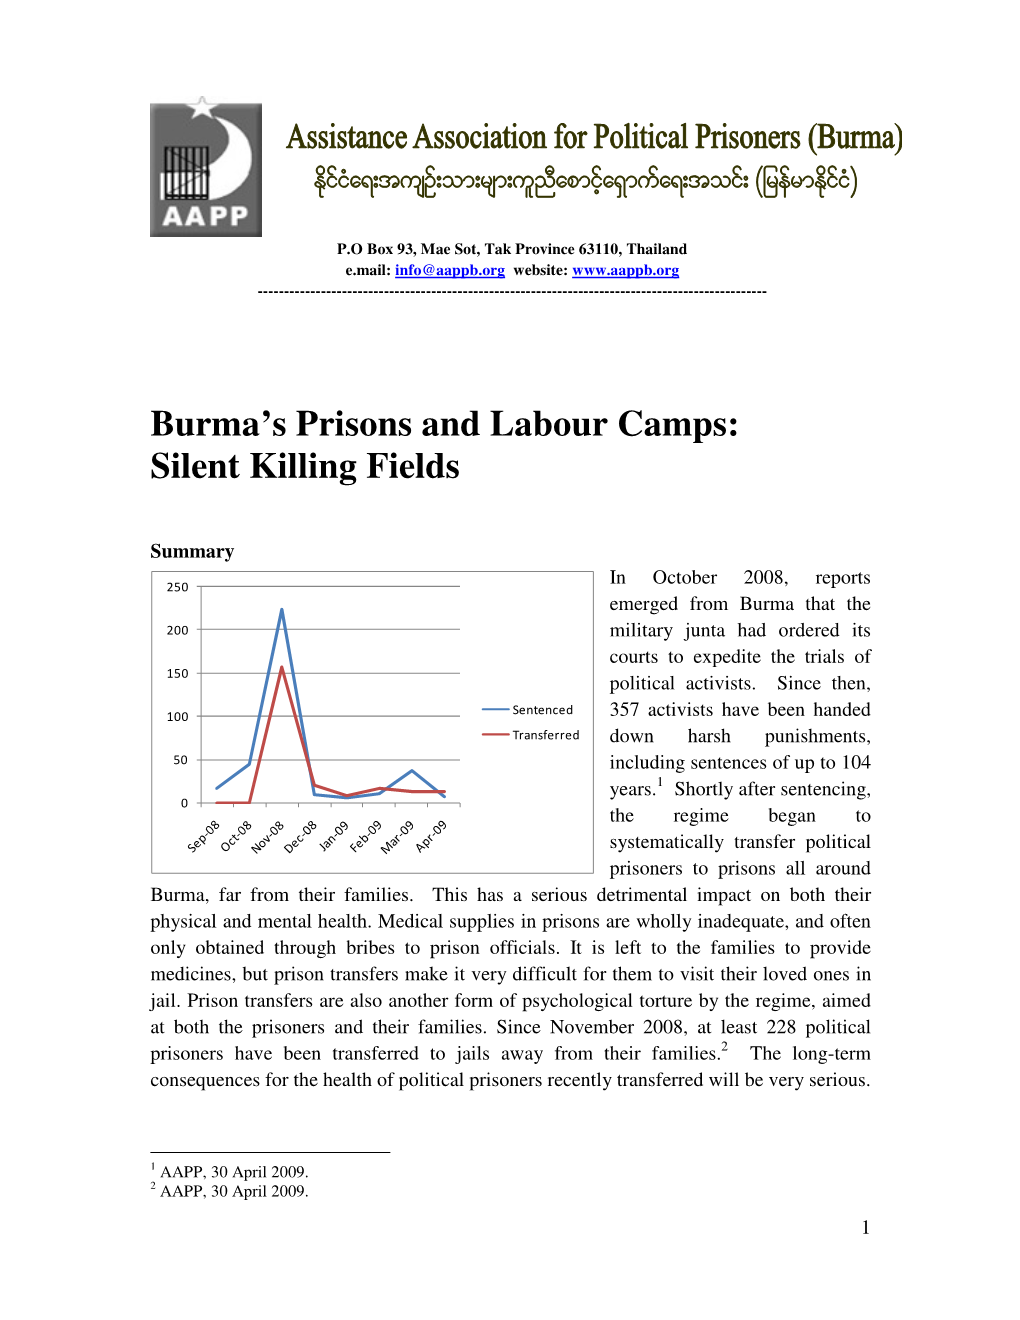 Burma's Prisons and Labour Camps